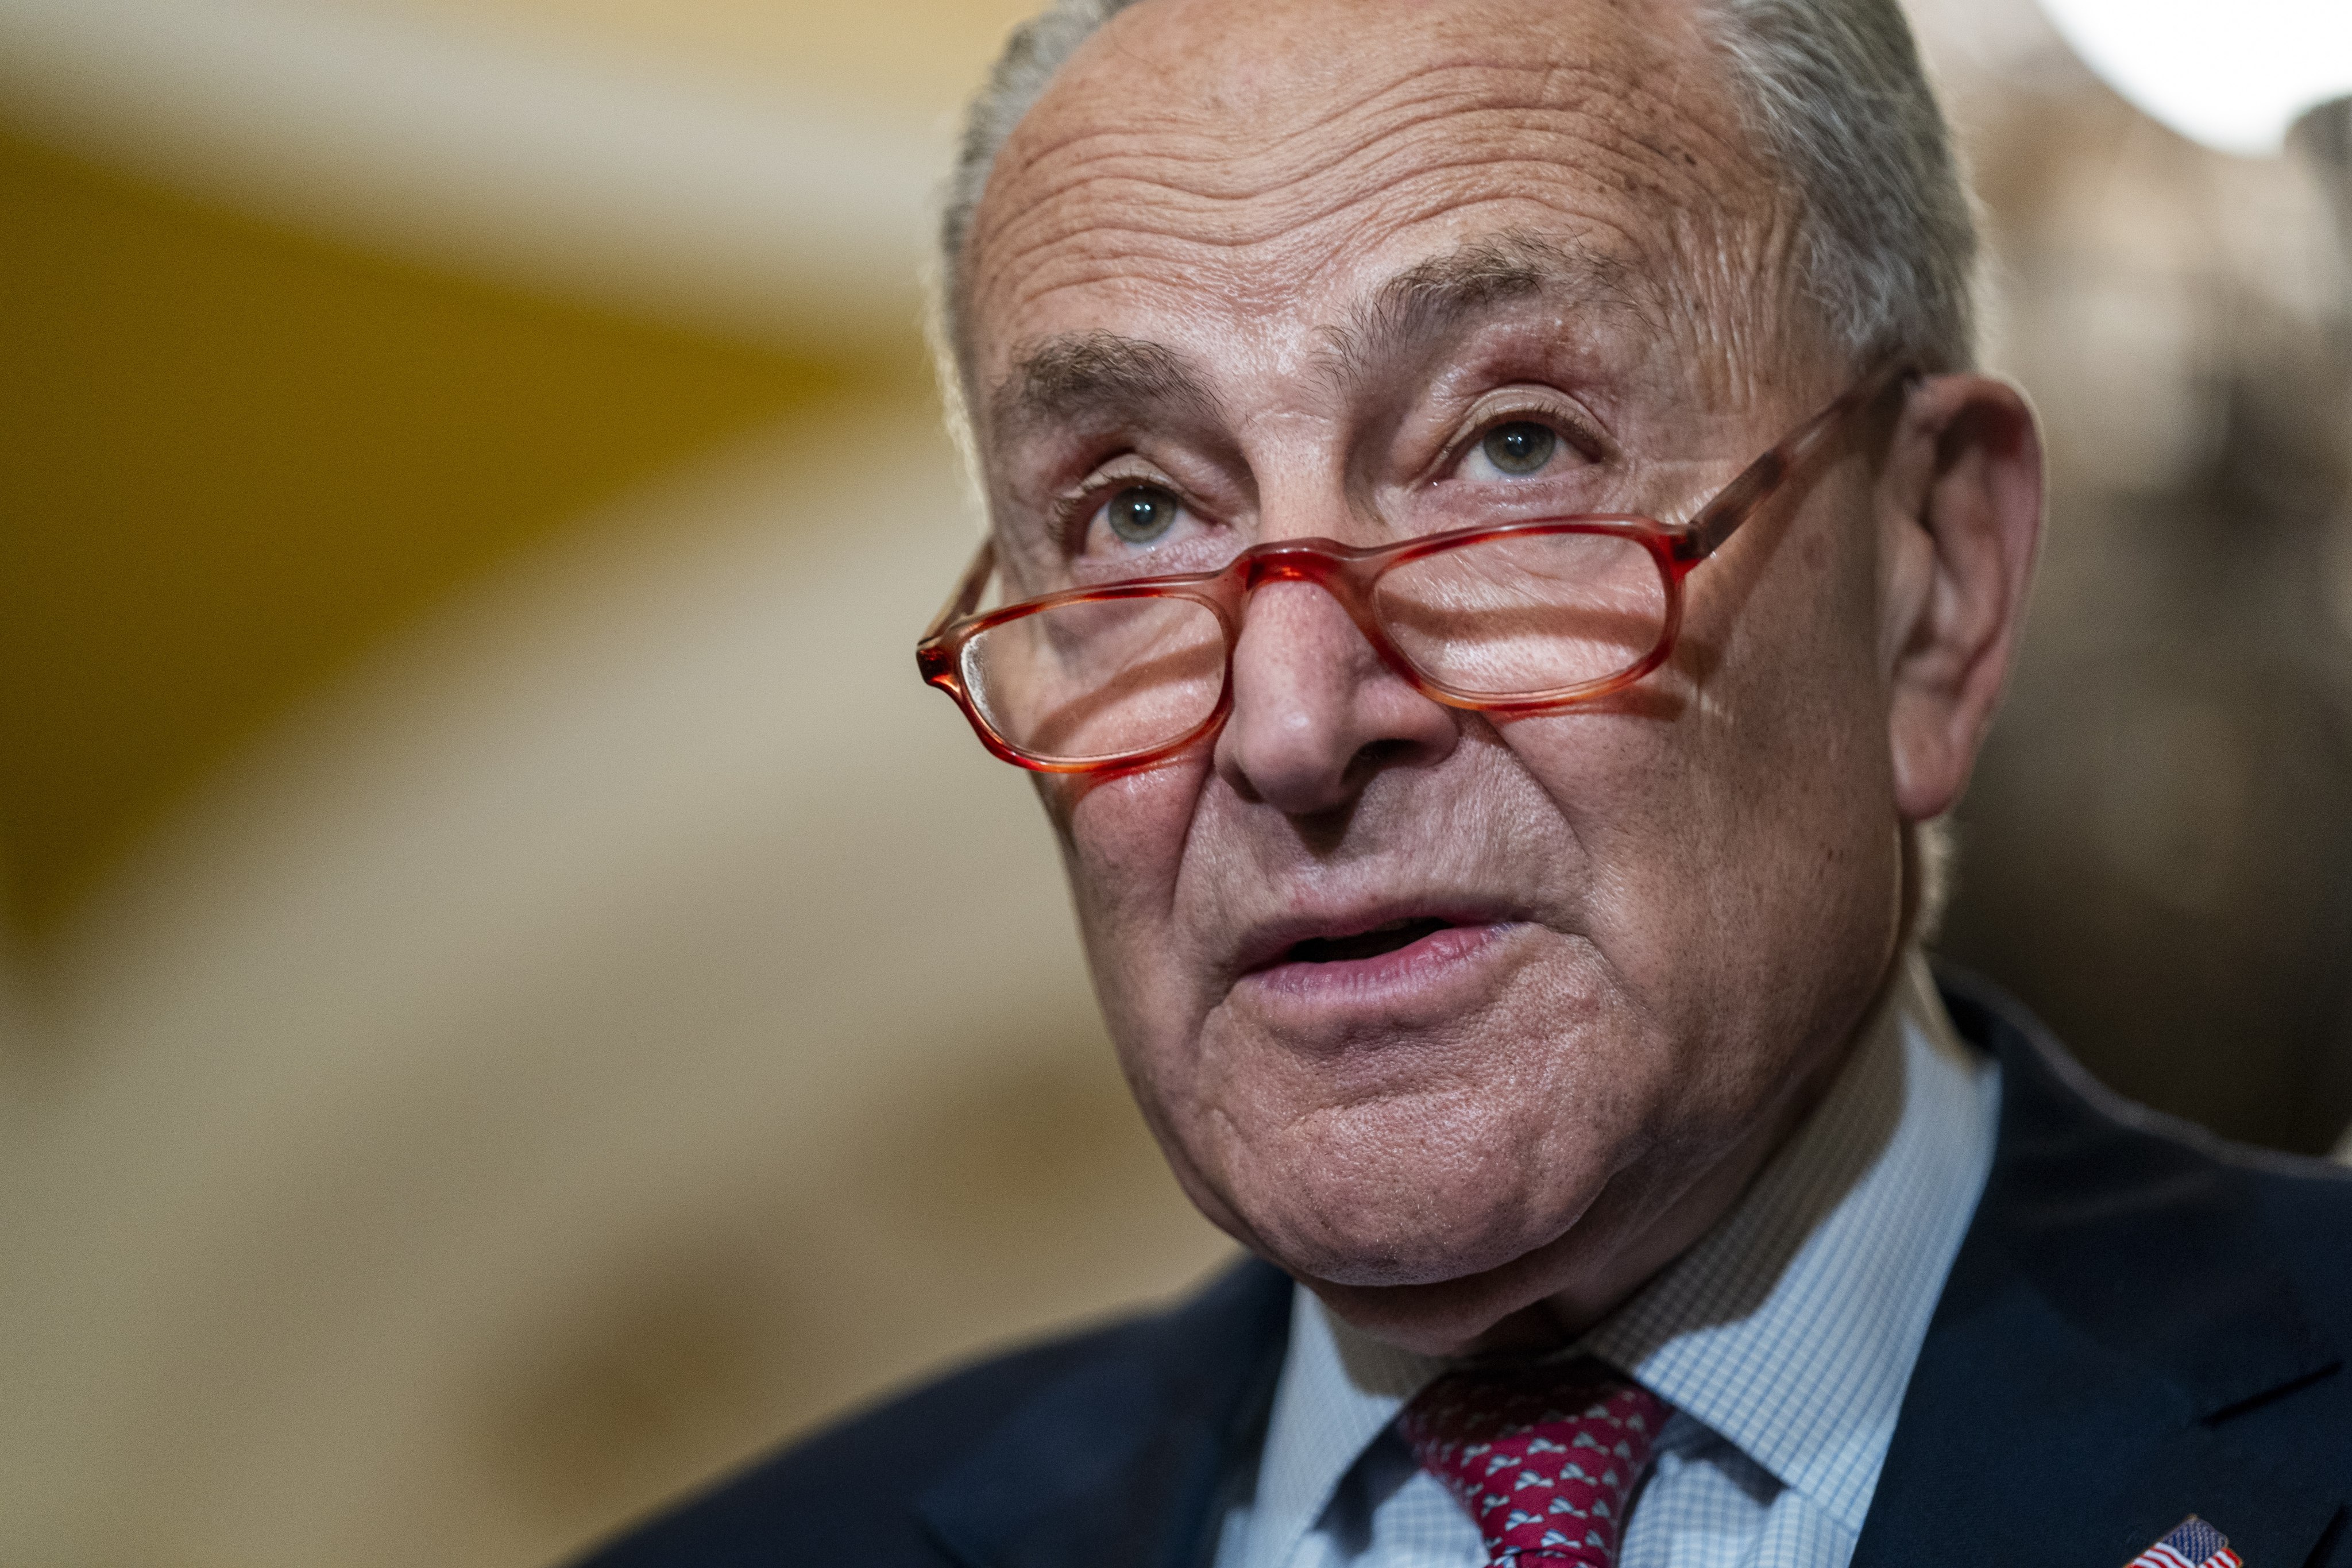 US Senate Majority Leader Chuck Schumer responds to a question from the news media at the US Capitol on Tuesday. Photo: EPA-EFE